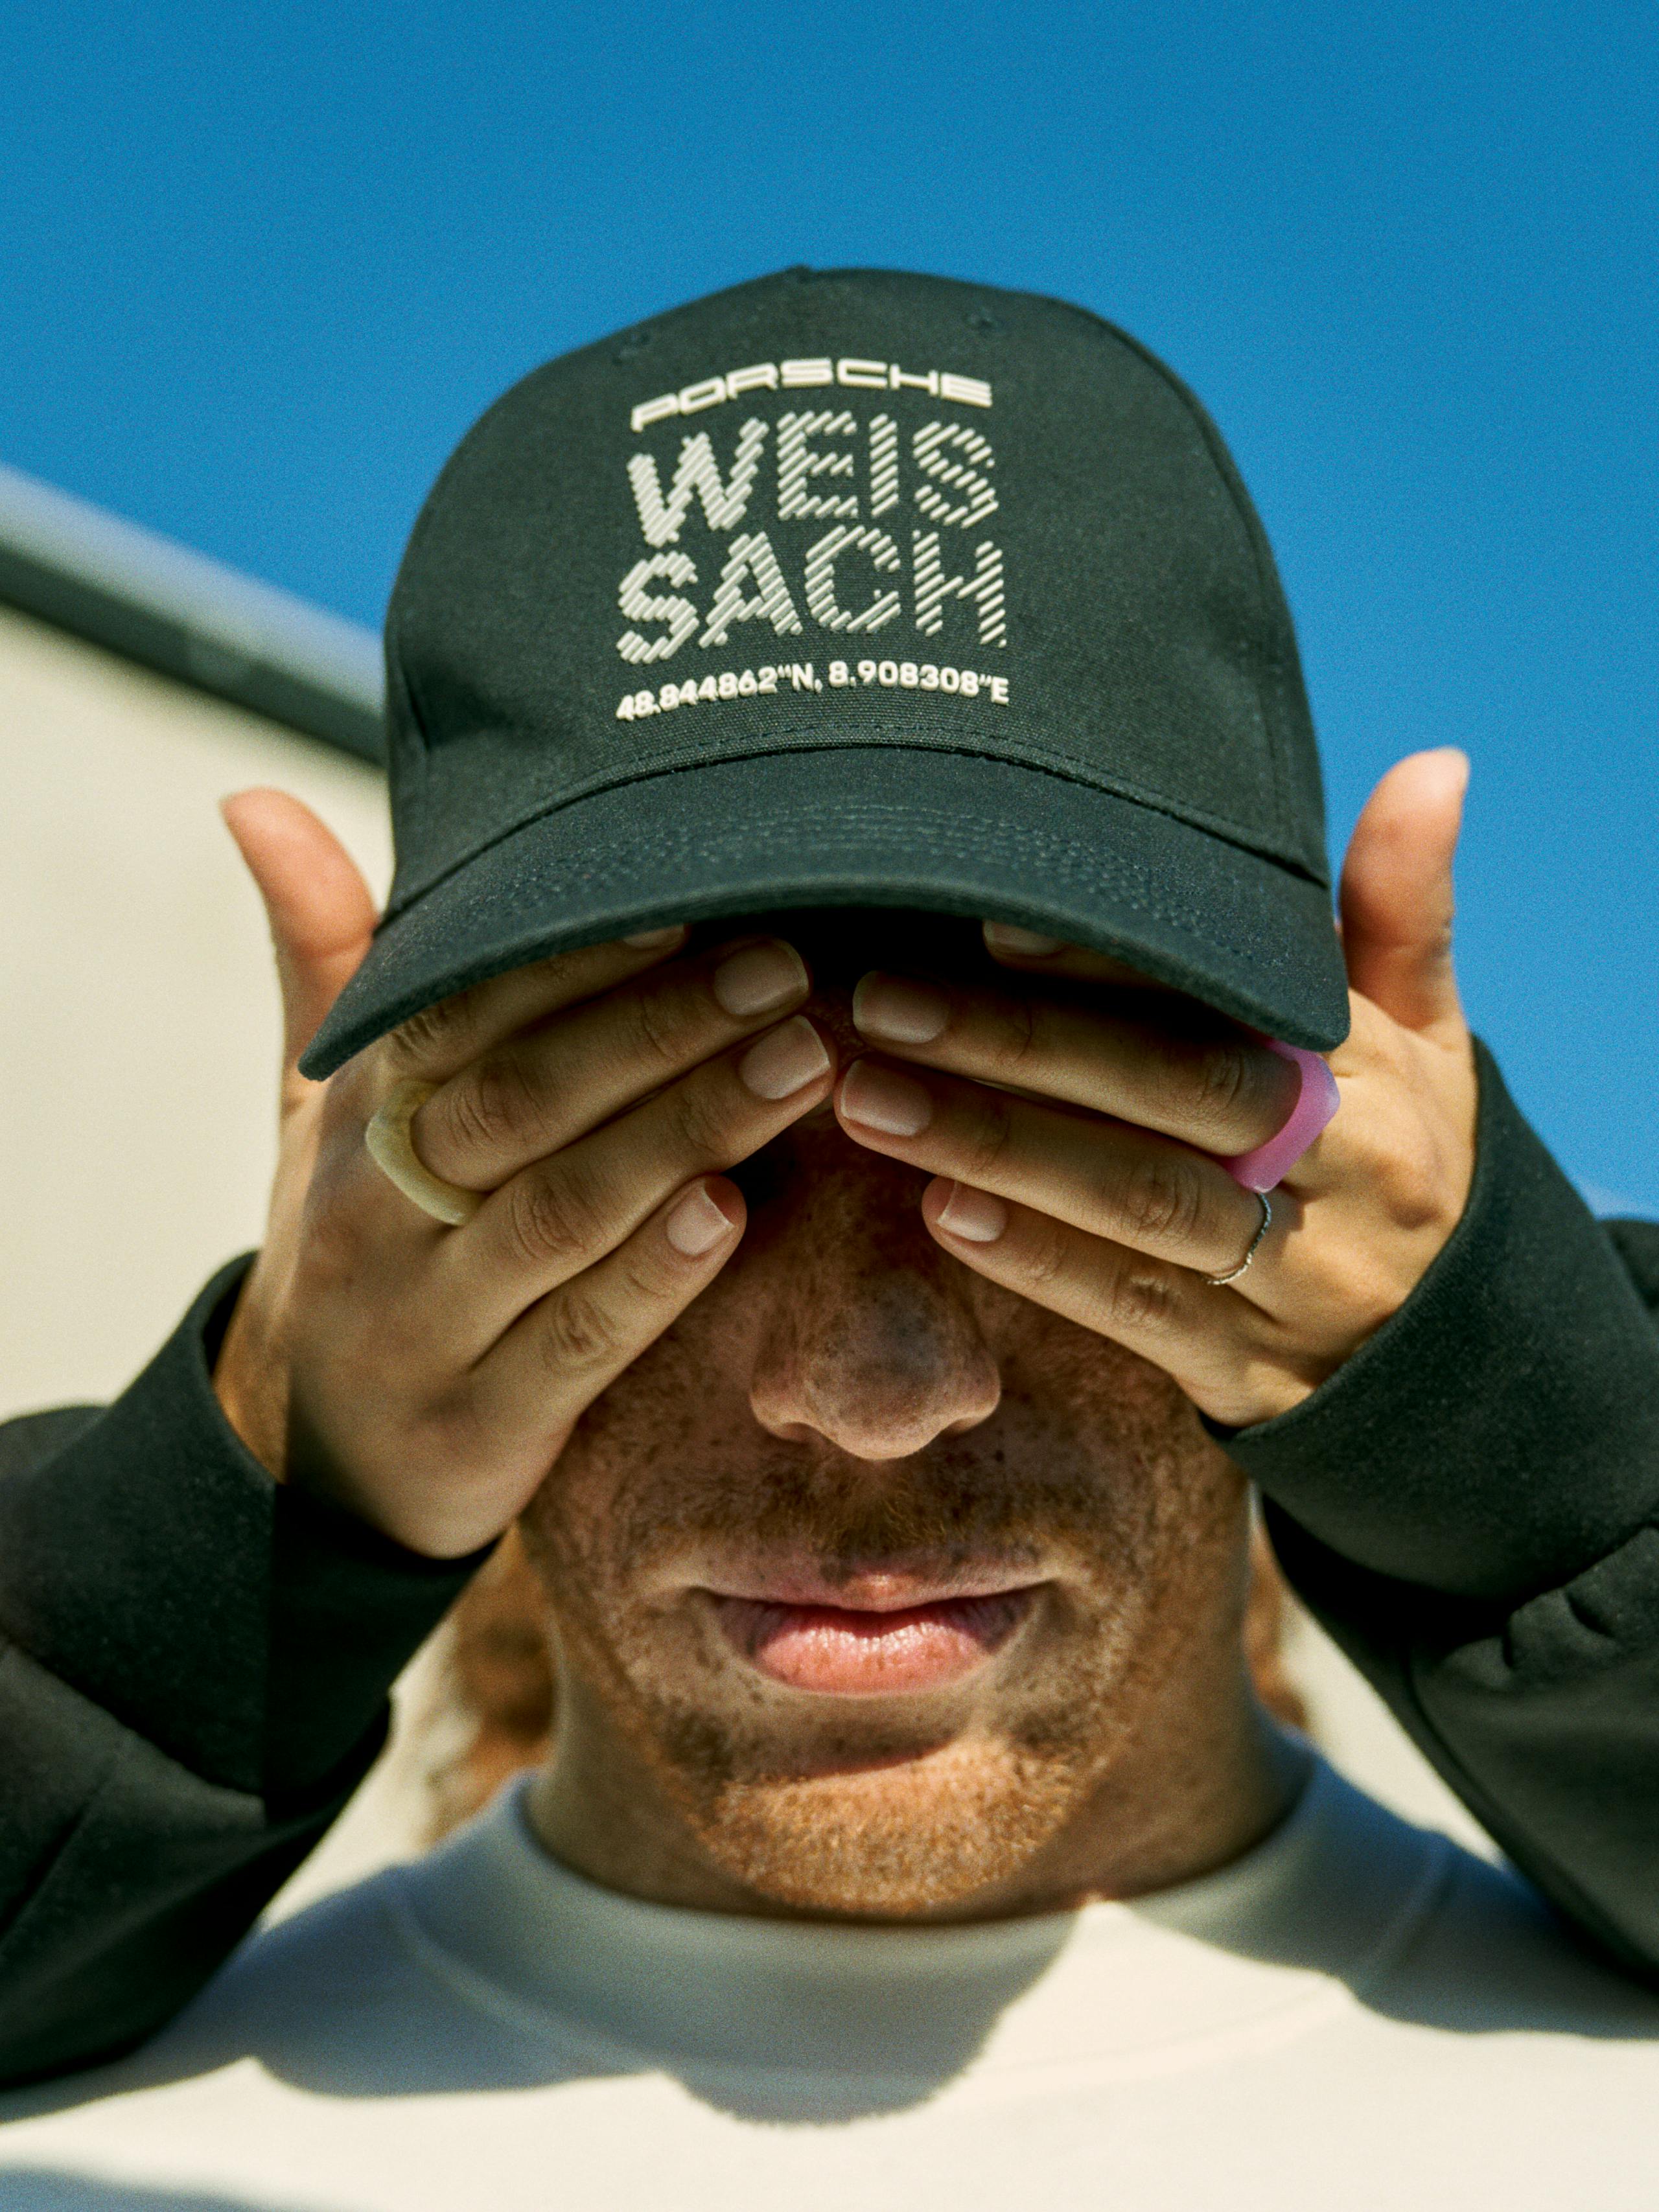 You can see a man with a cap and the white lettering "Weissach". The man's eyes are kept from behind.